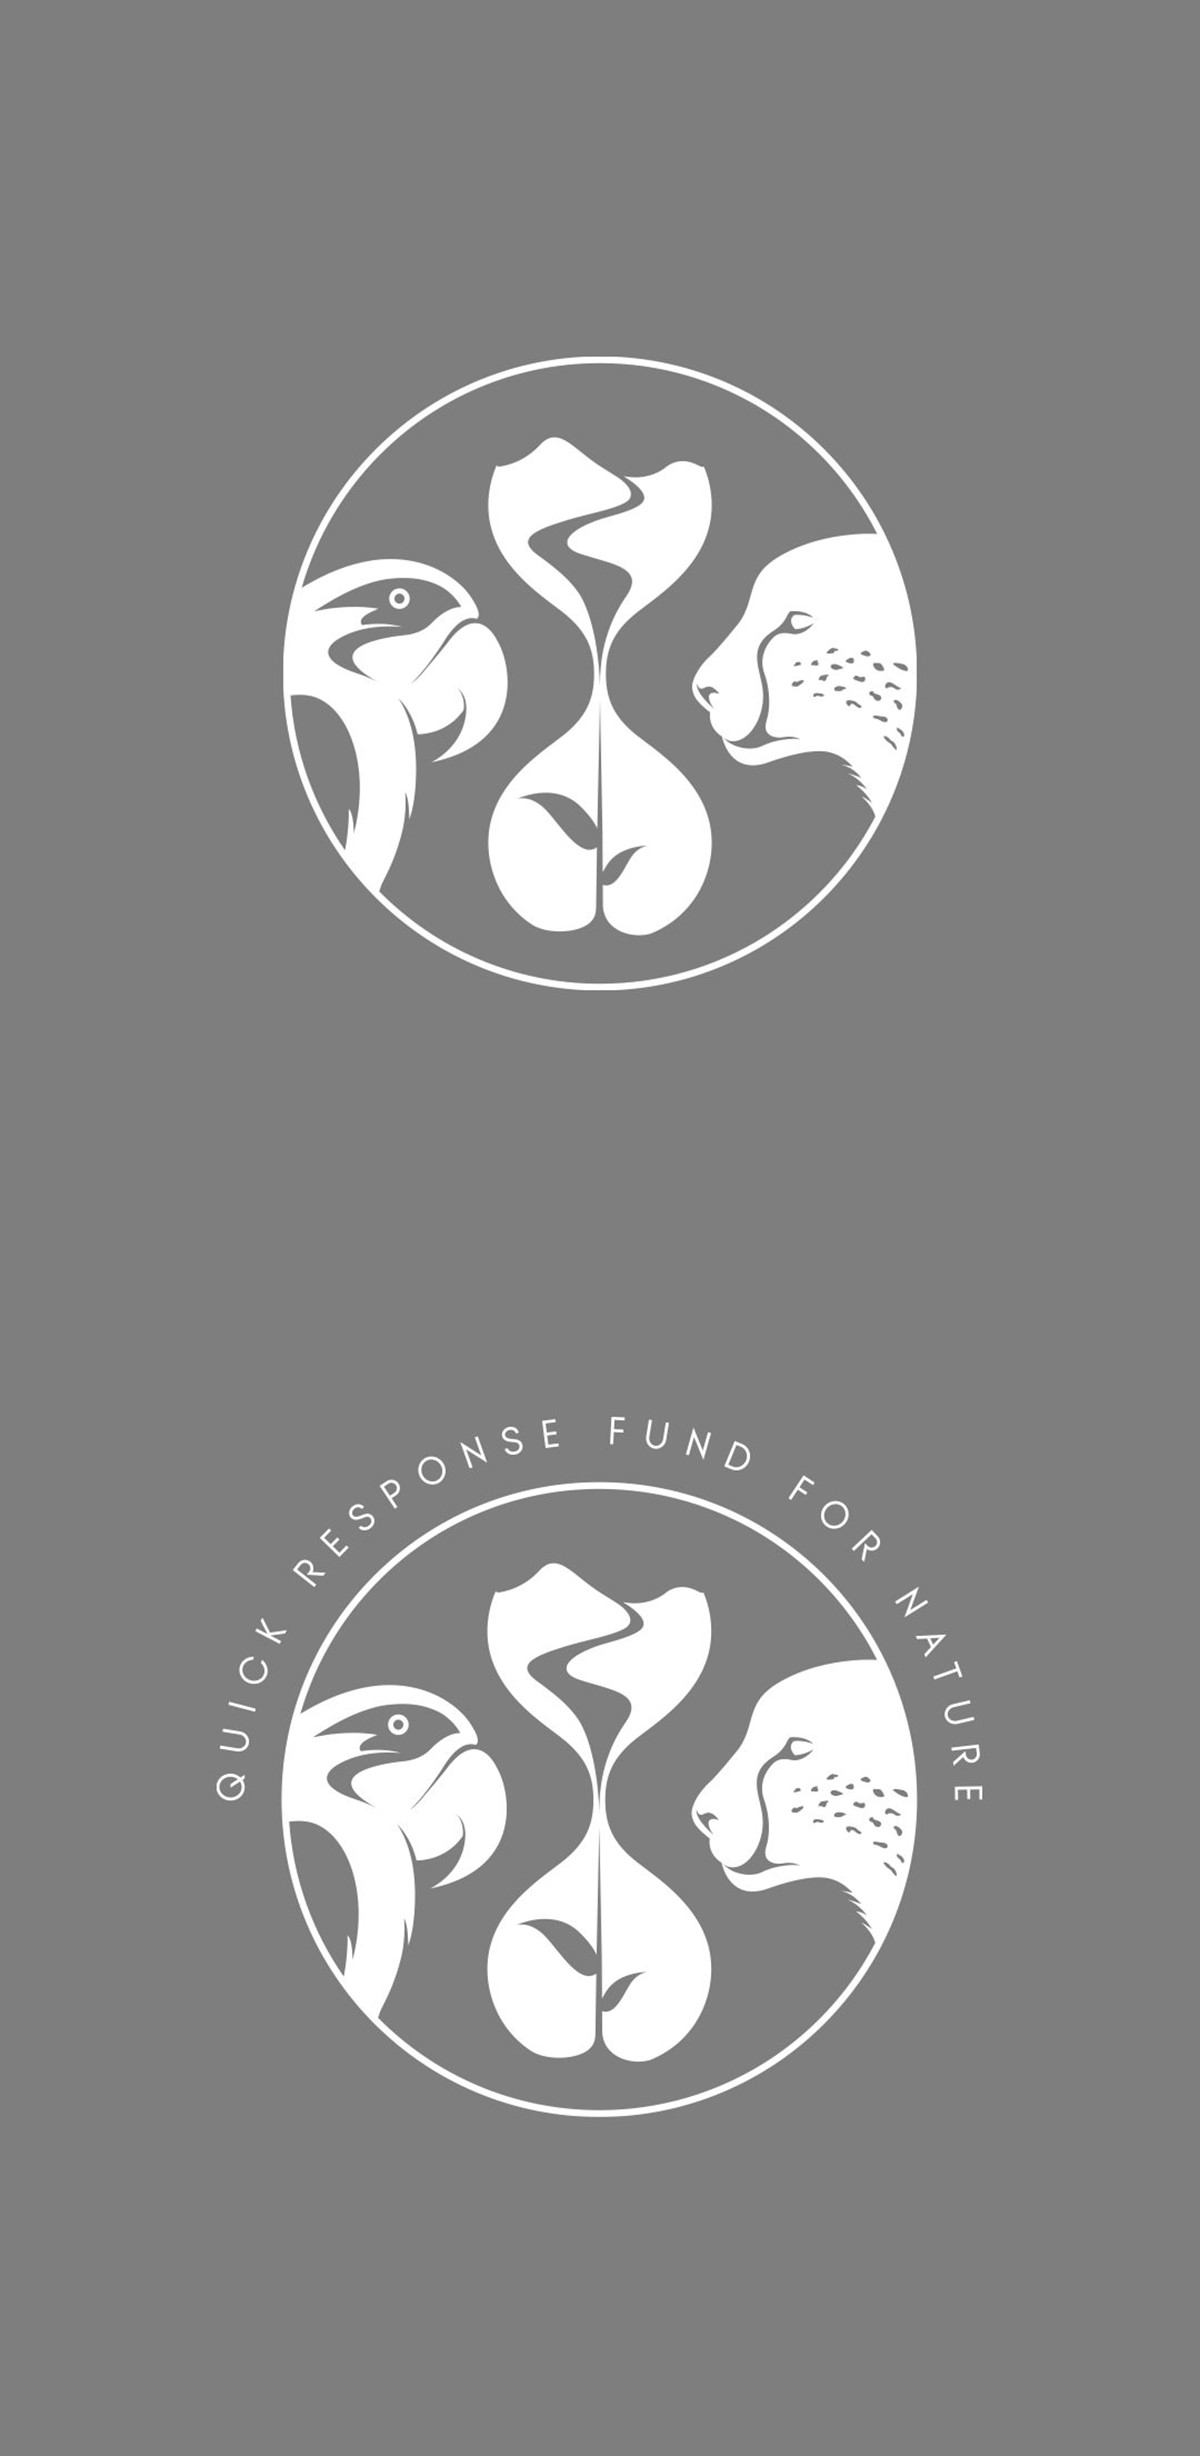 QRFN. Quick Response Fund for Nature – Logo variations. Brand identity design by Superfried. 